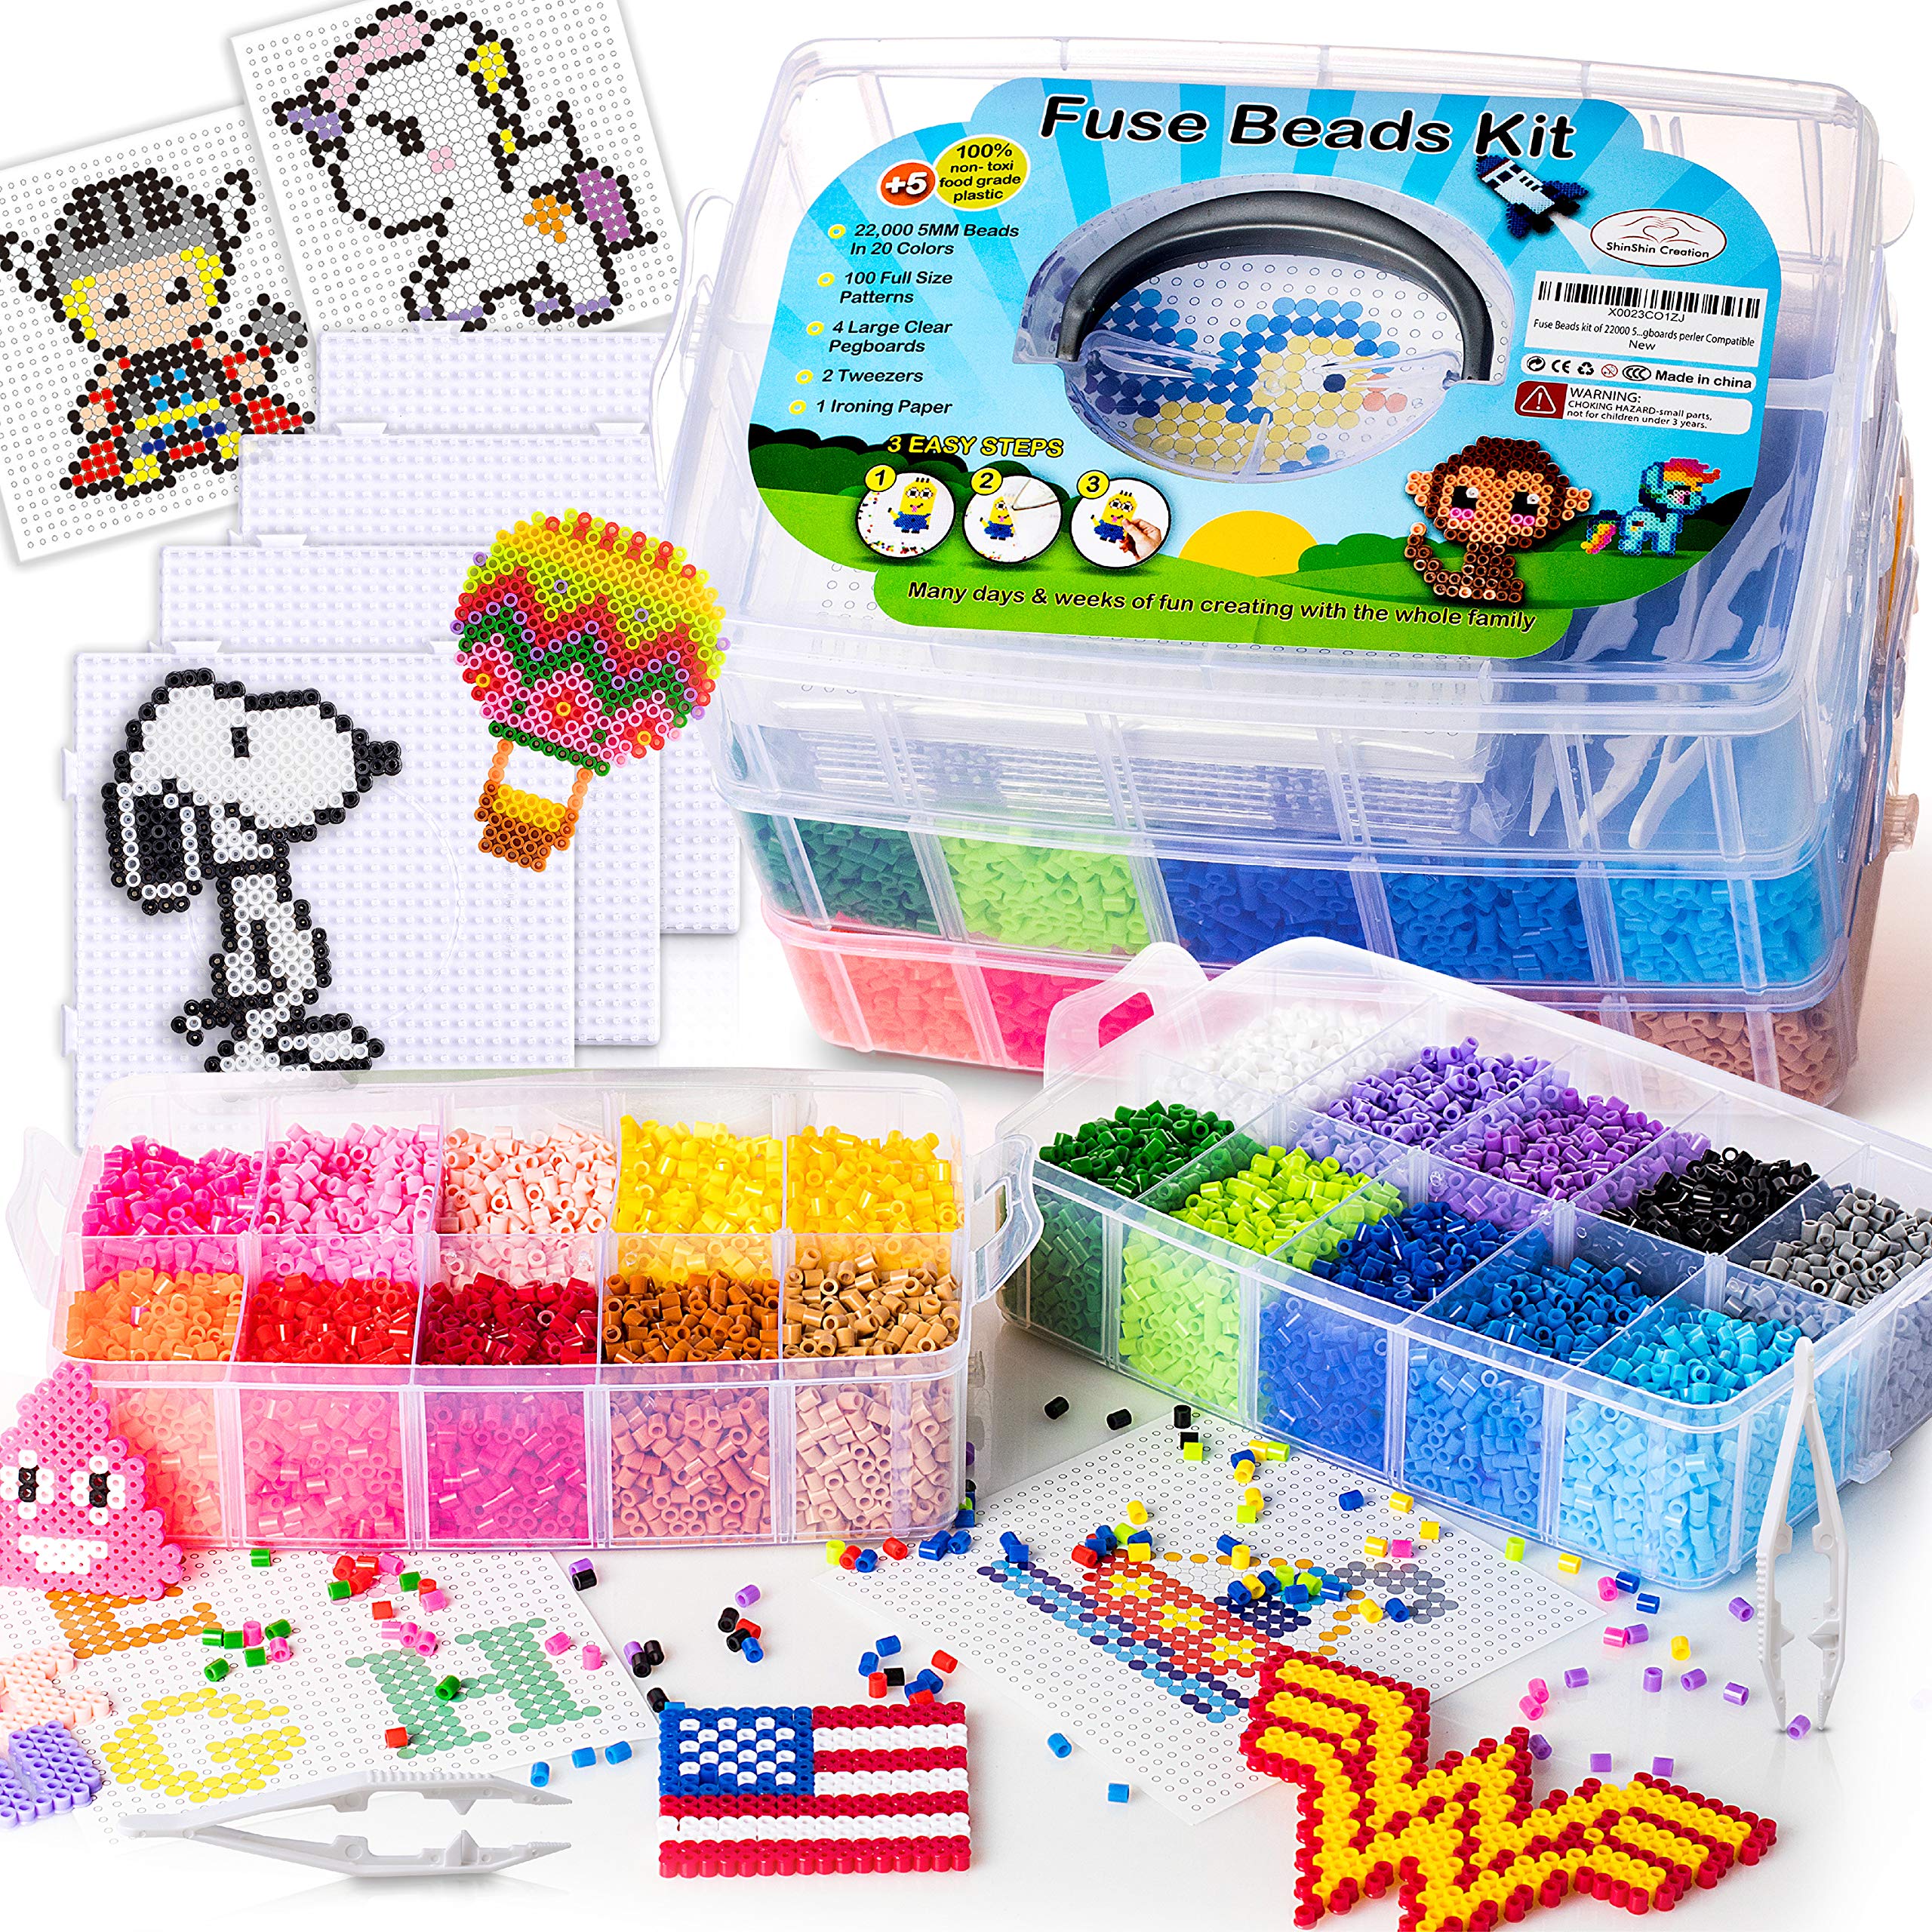 22,000 Fuse Beads kit 5mm, 100 Patterns 4 Pegboards 2 Tweezers Perler Beads  Kit Compatible Hama Beads Melty Beads Melting Beads Iron Beads Craft Beads  Bulk Beados kit Storage 20 Pre-Sorted Colors